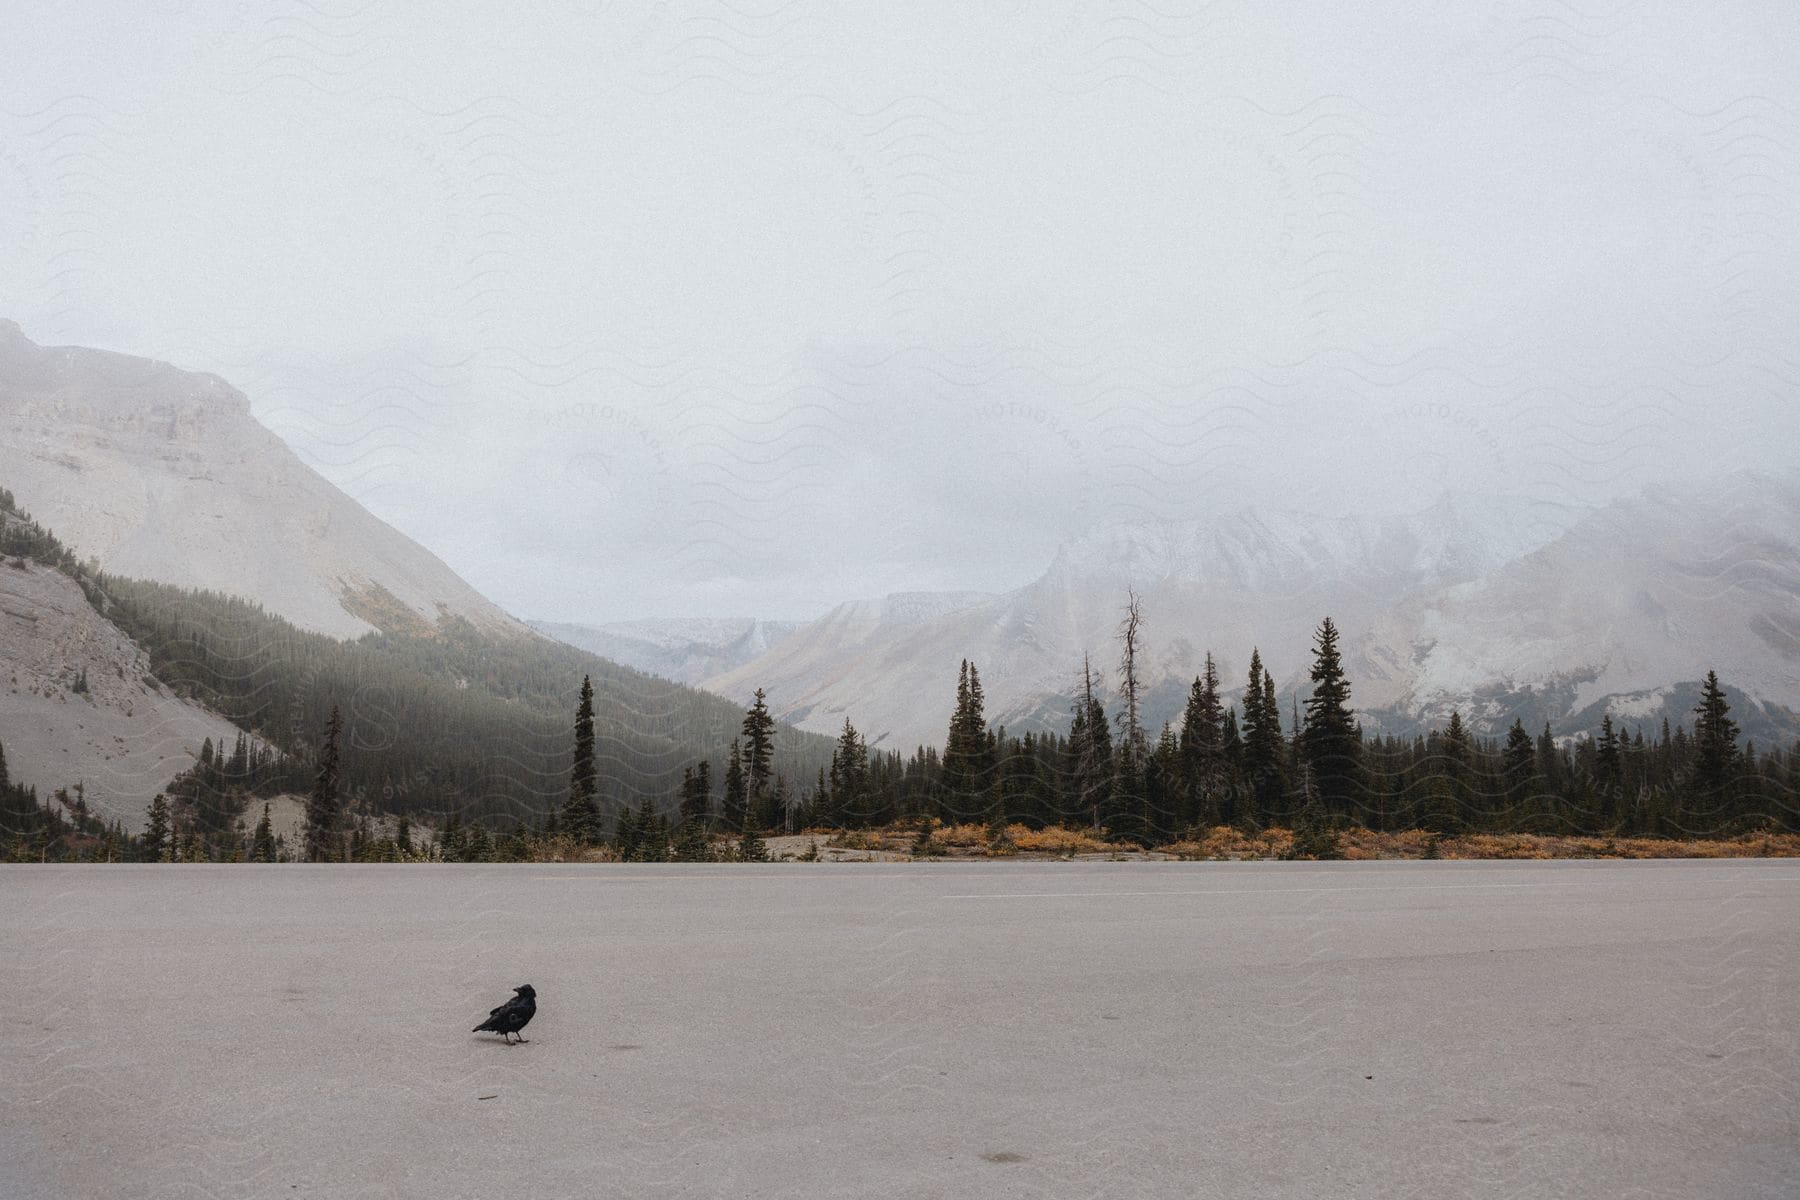 A lone bird stands on a frozen lake, with mountains and trees in the background. The scene evokes a sense of isolation and melancholy.